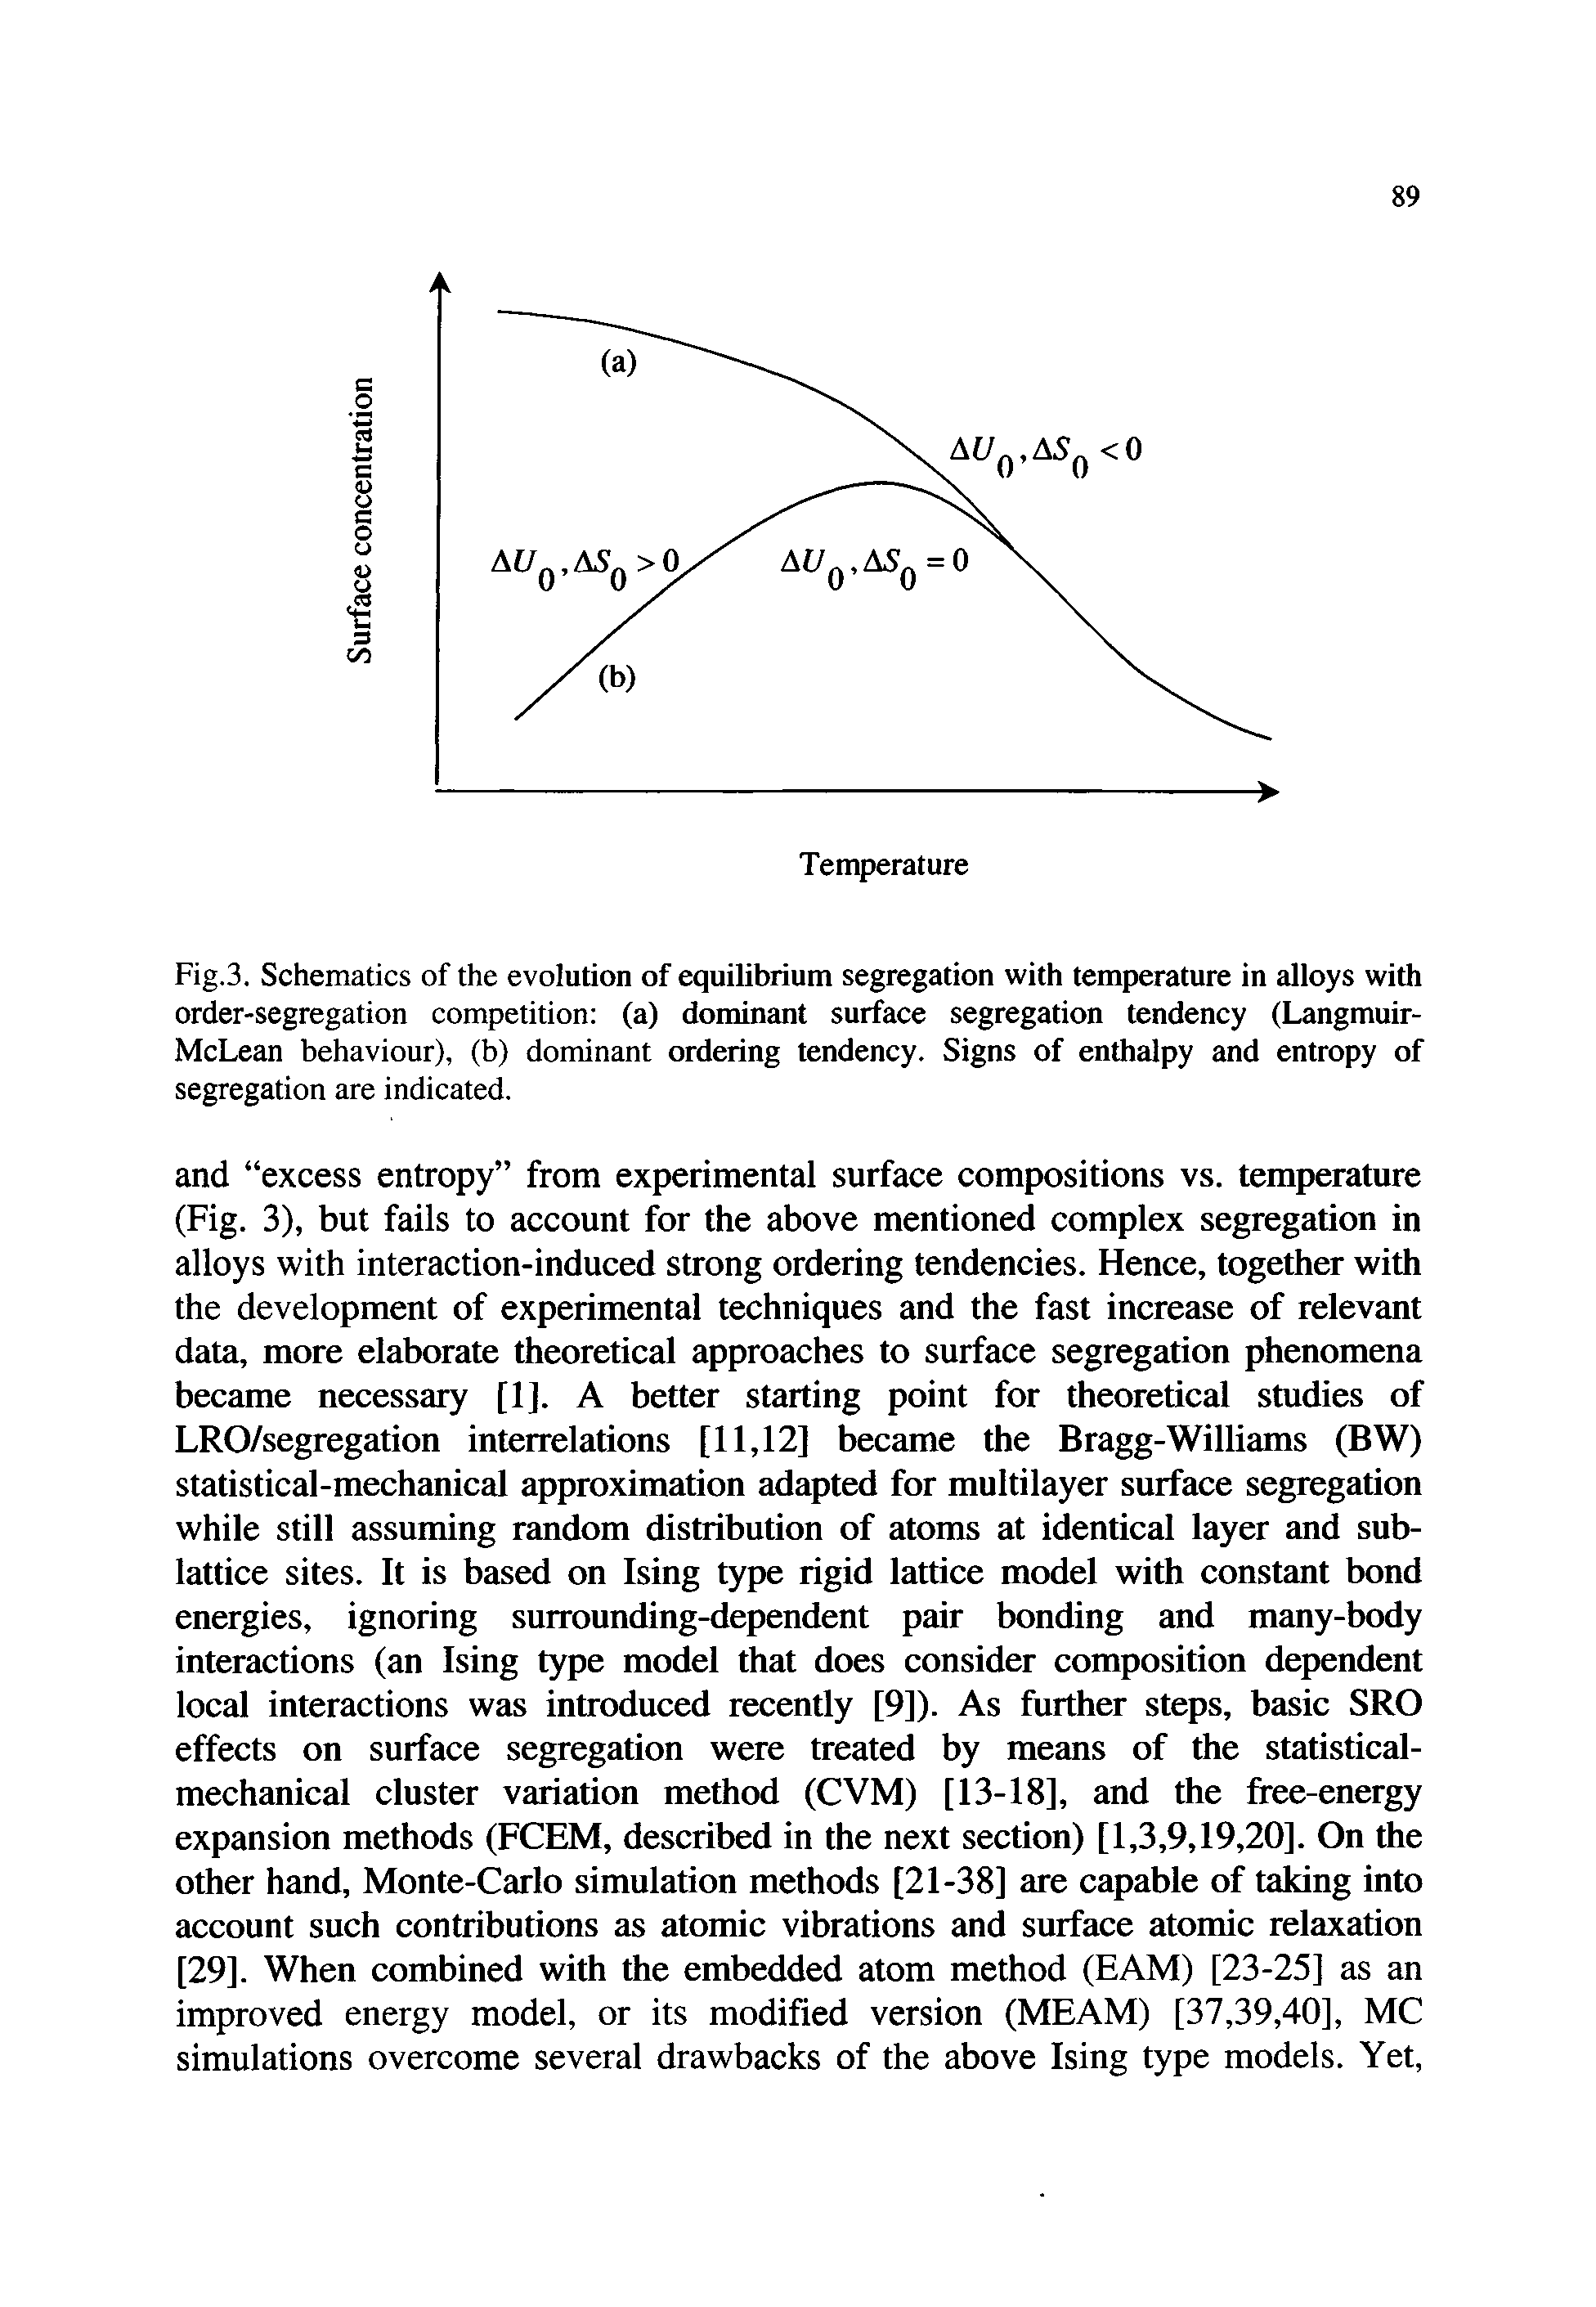 Fig.3. Schematics of the evolution of equilibrium segregation with temperature in alloys with order-segregation competition (a) dominant surface segregation tendency (Langmuir-McLean behaviour), (b) dominant ordering tendency. Signs of enthalpy and entropy of segregation are indicated.